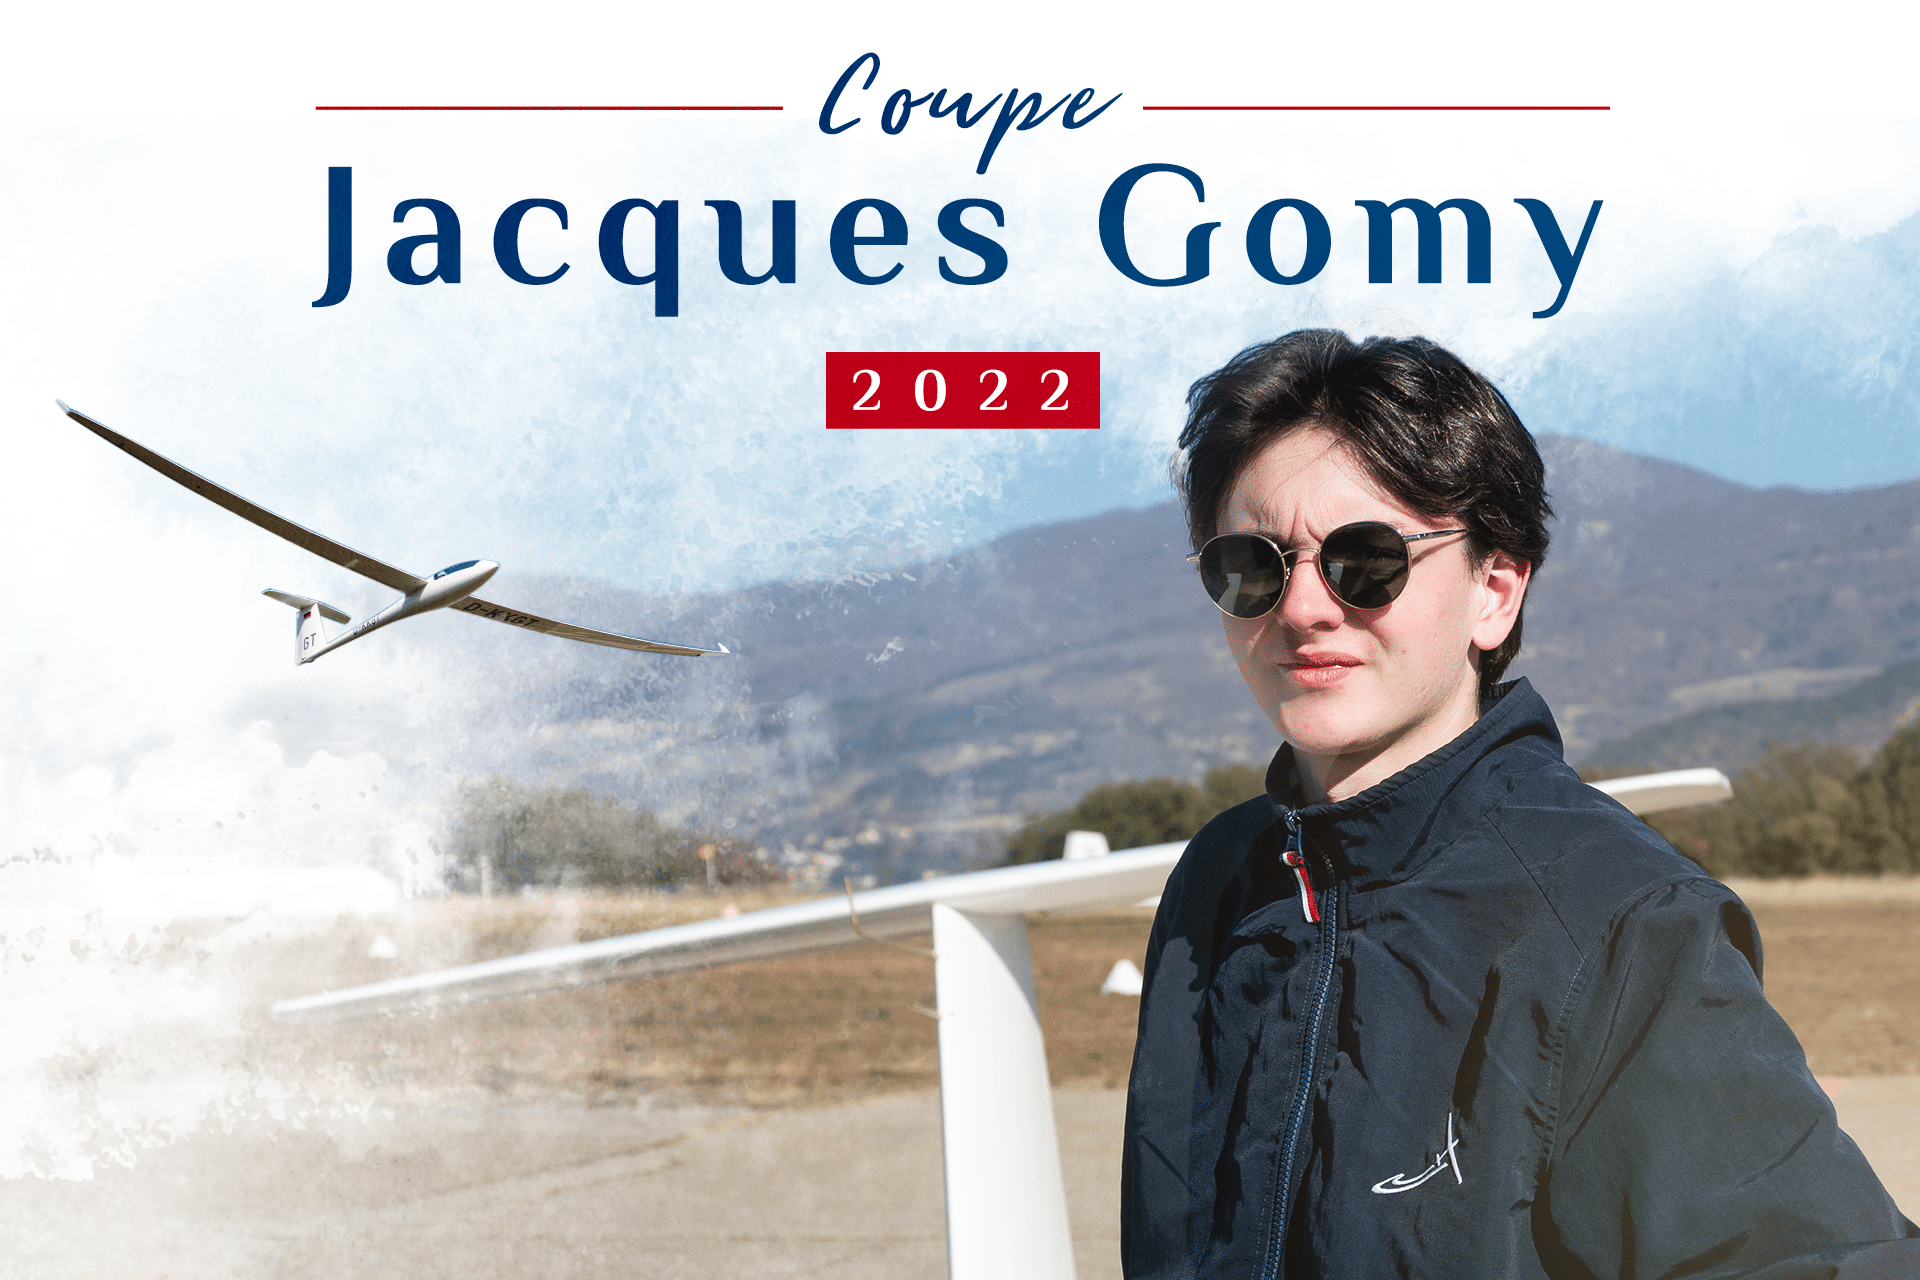 Coupe Jacques Gomy 2023